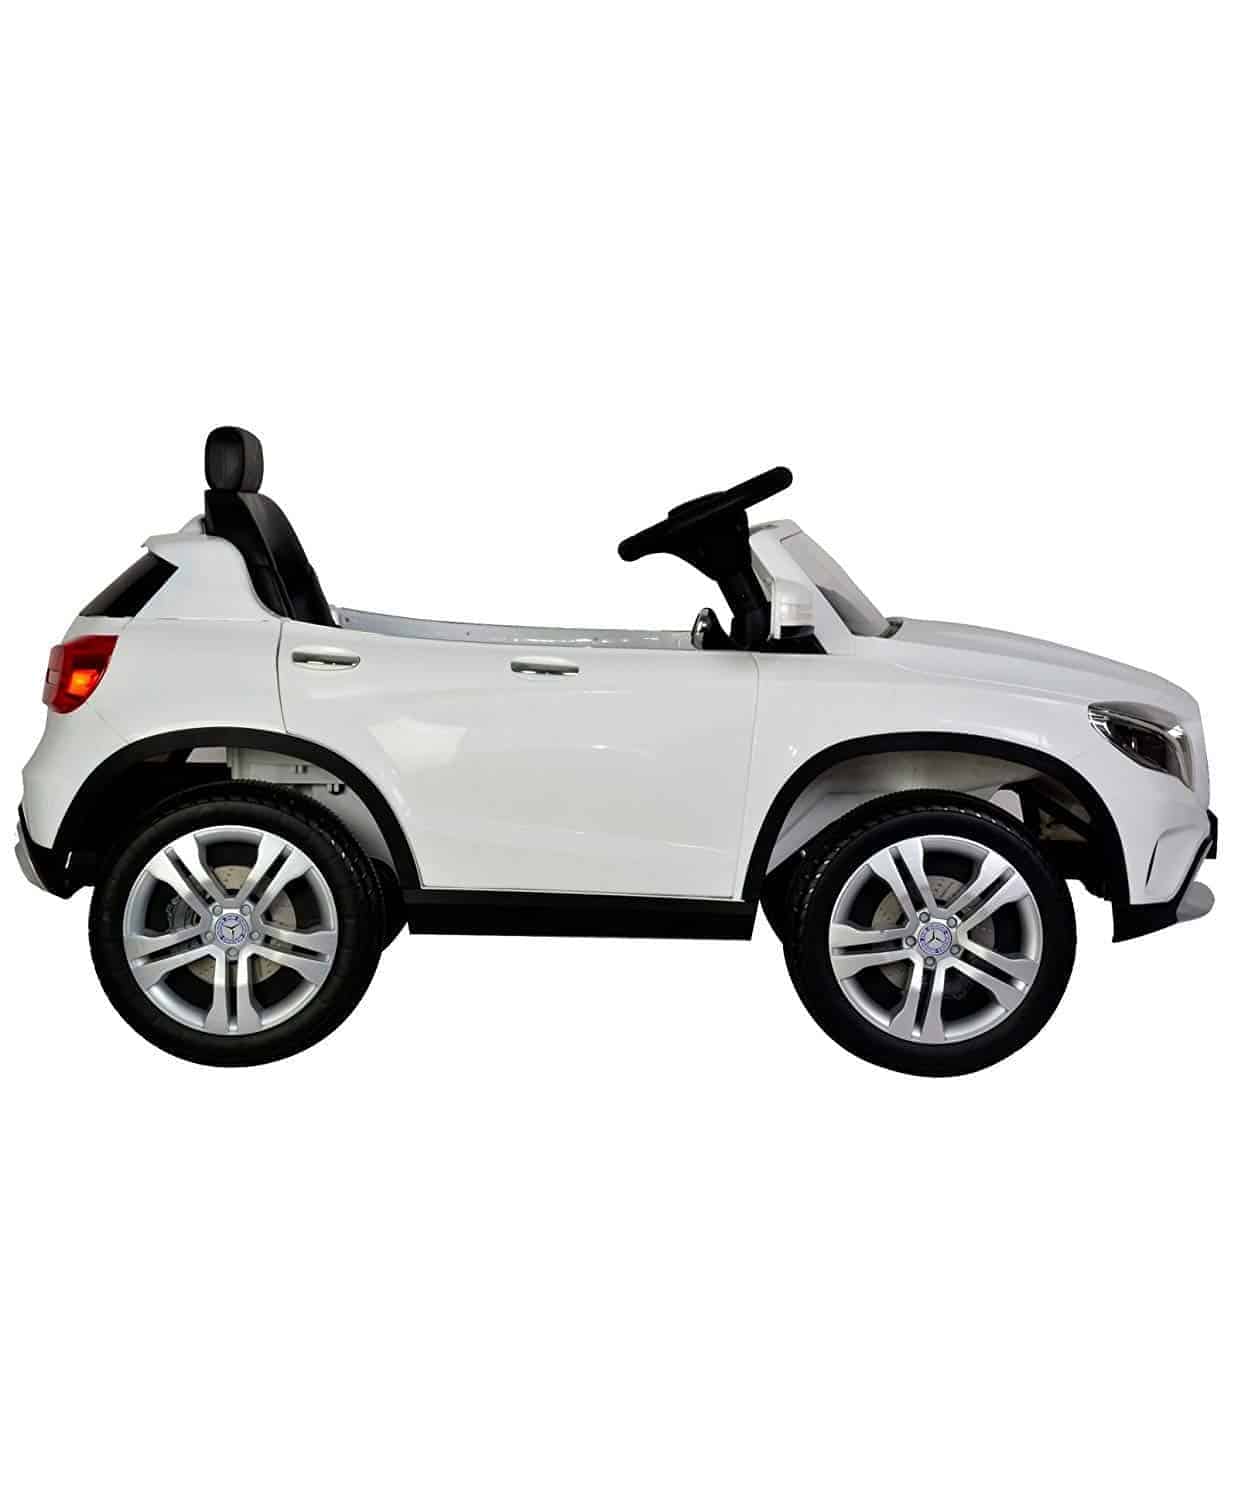 Kids ride on Mercedes gla class ride on car Licensed Mercedes Benz GLA Class 12V